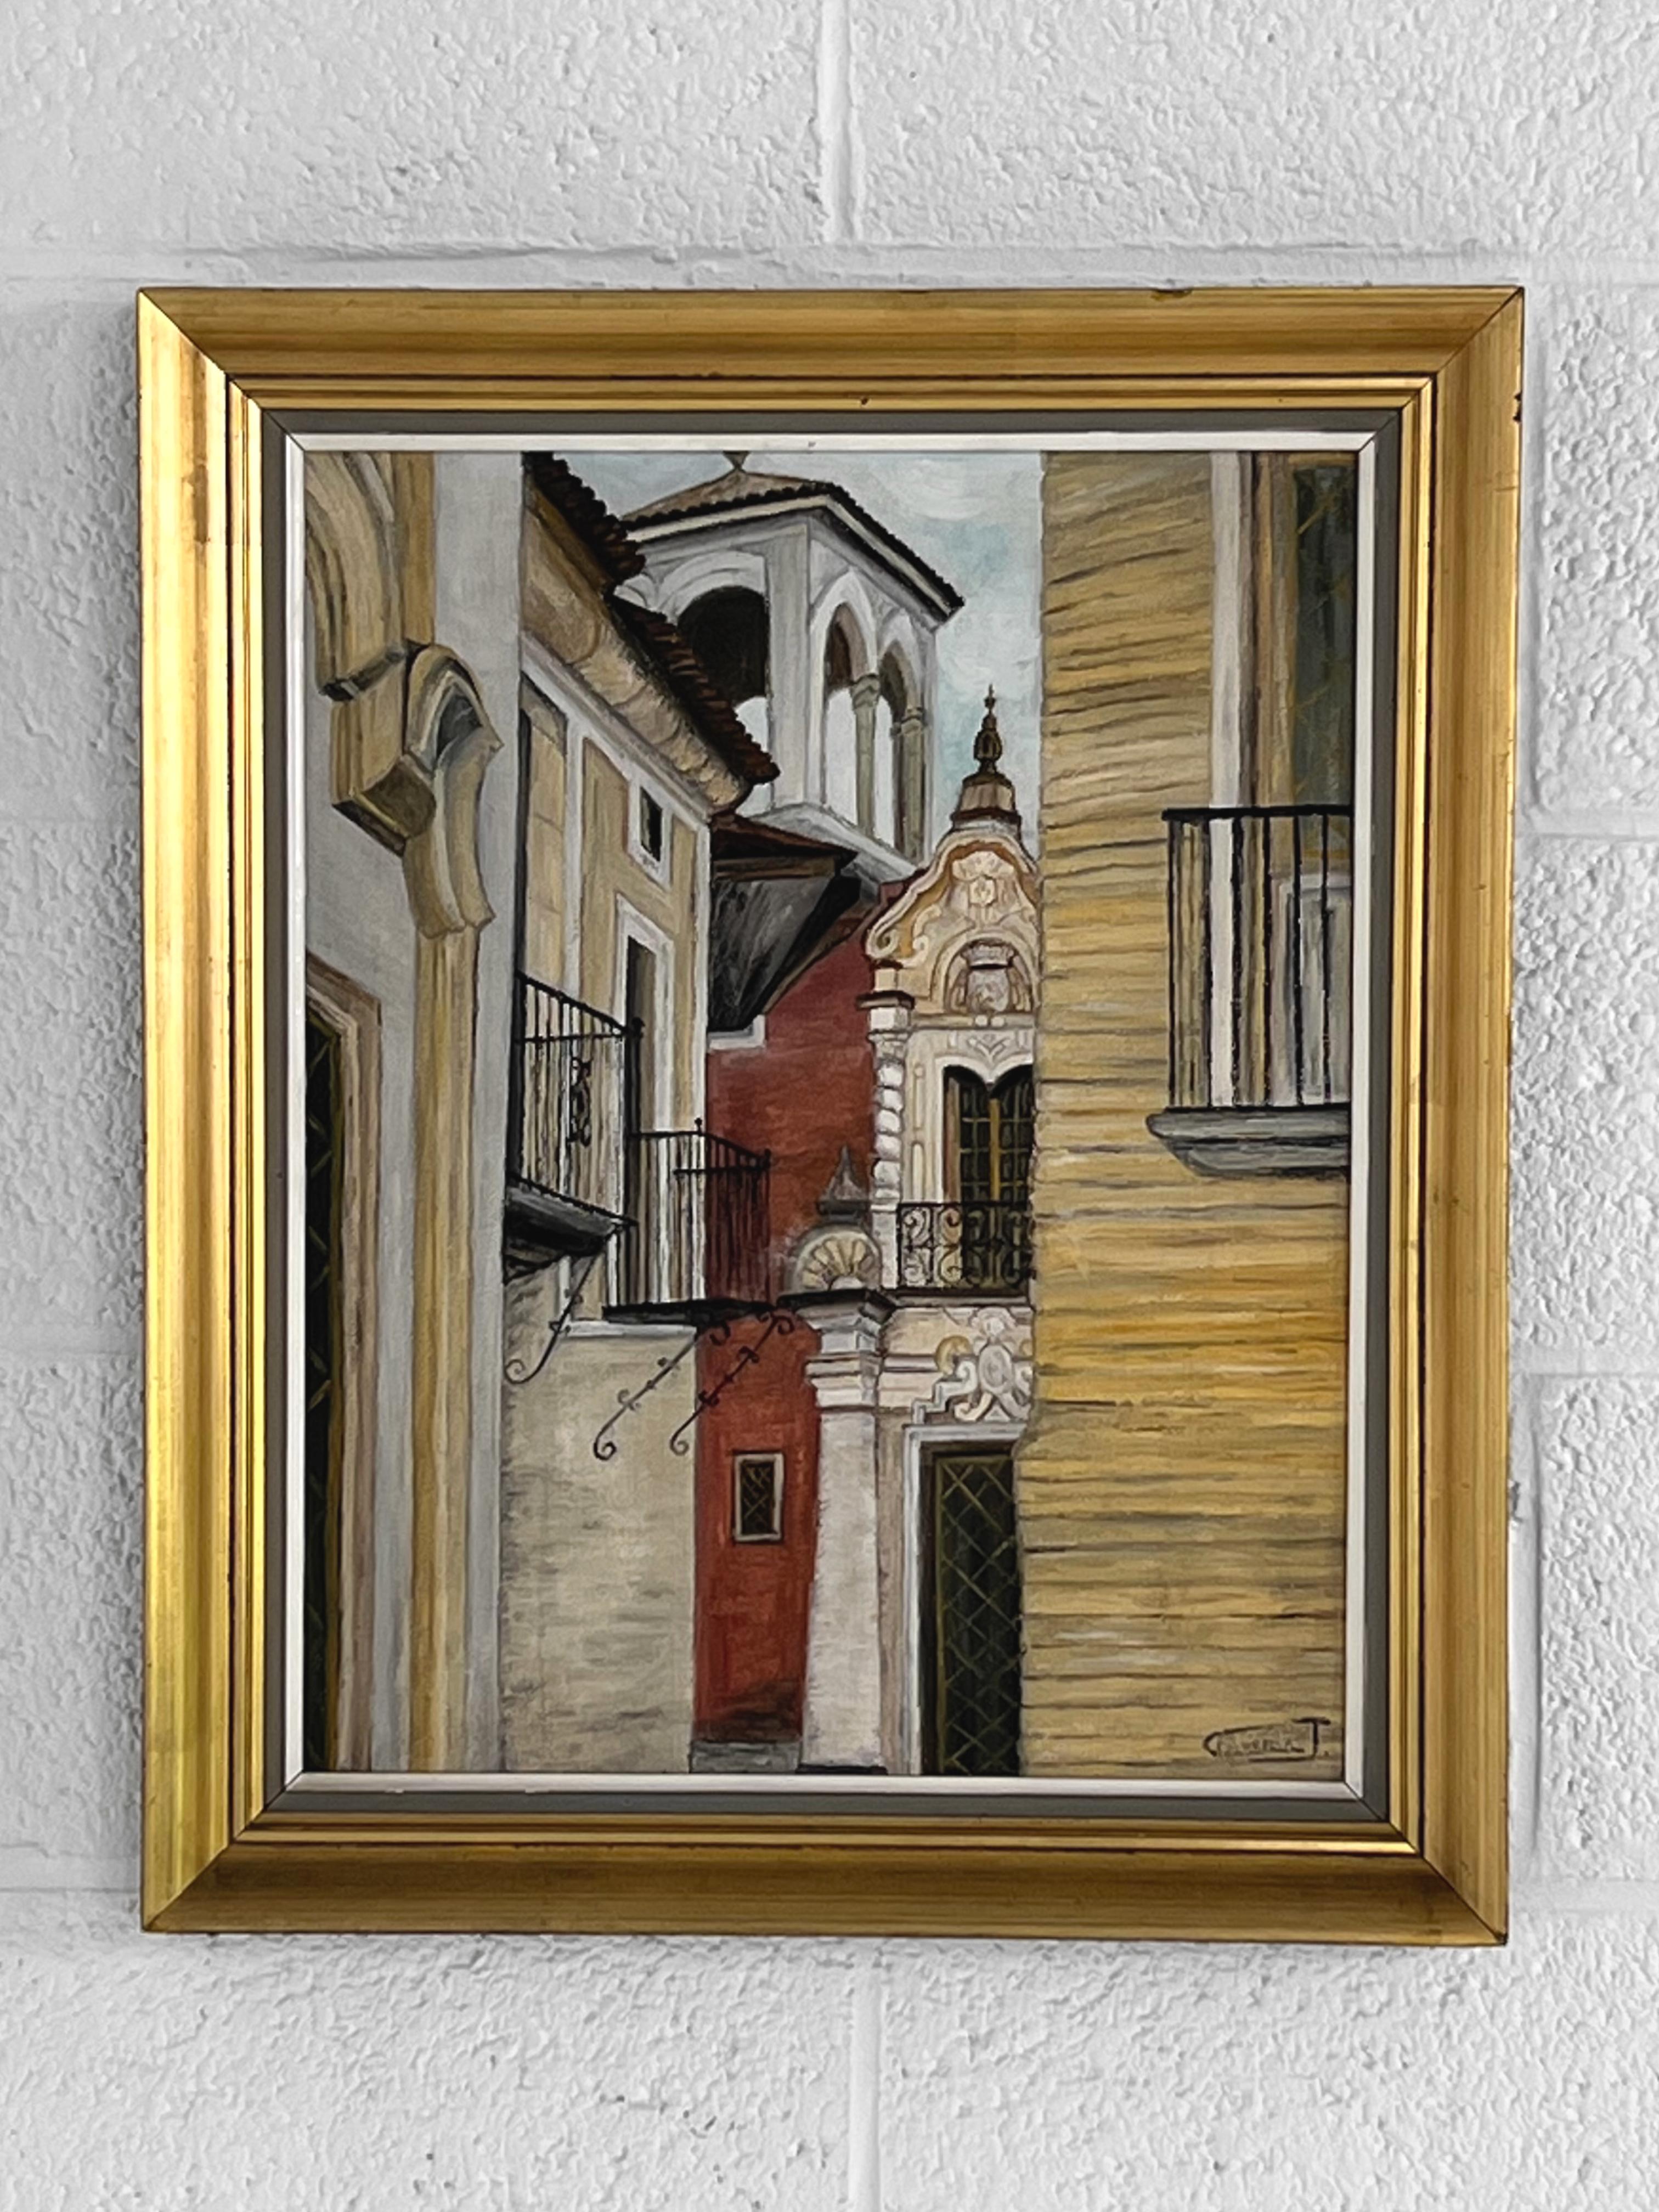 Impressionist Oil Painting Architecture of Town showing a close up of a town, especially windows, balconies and bell tower. Black Lacquer and Gilded wooden structure.